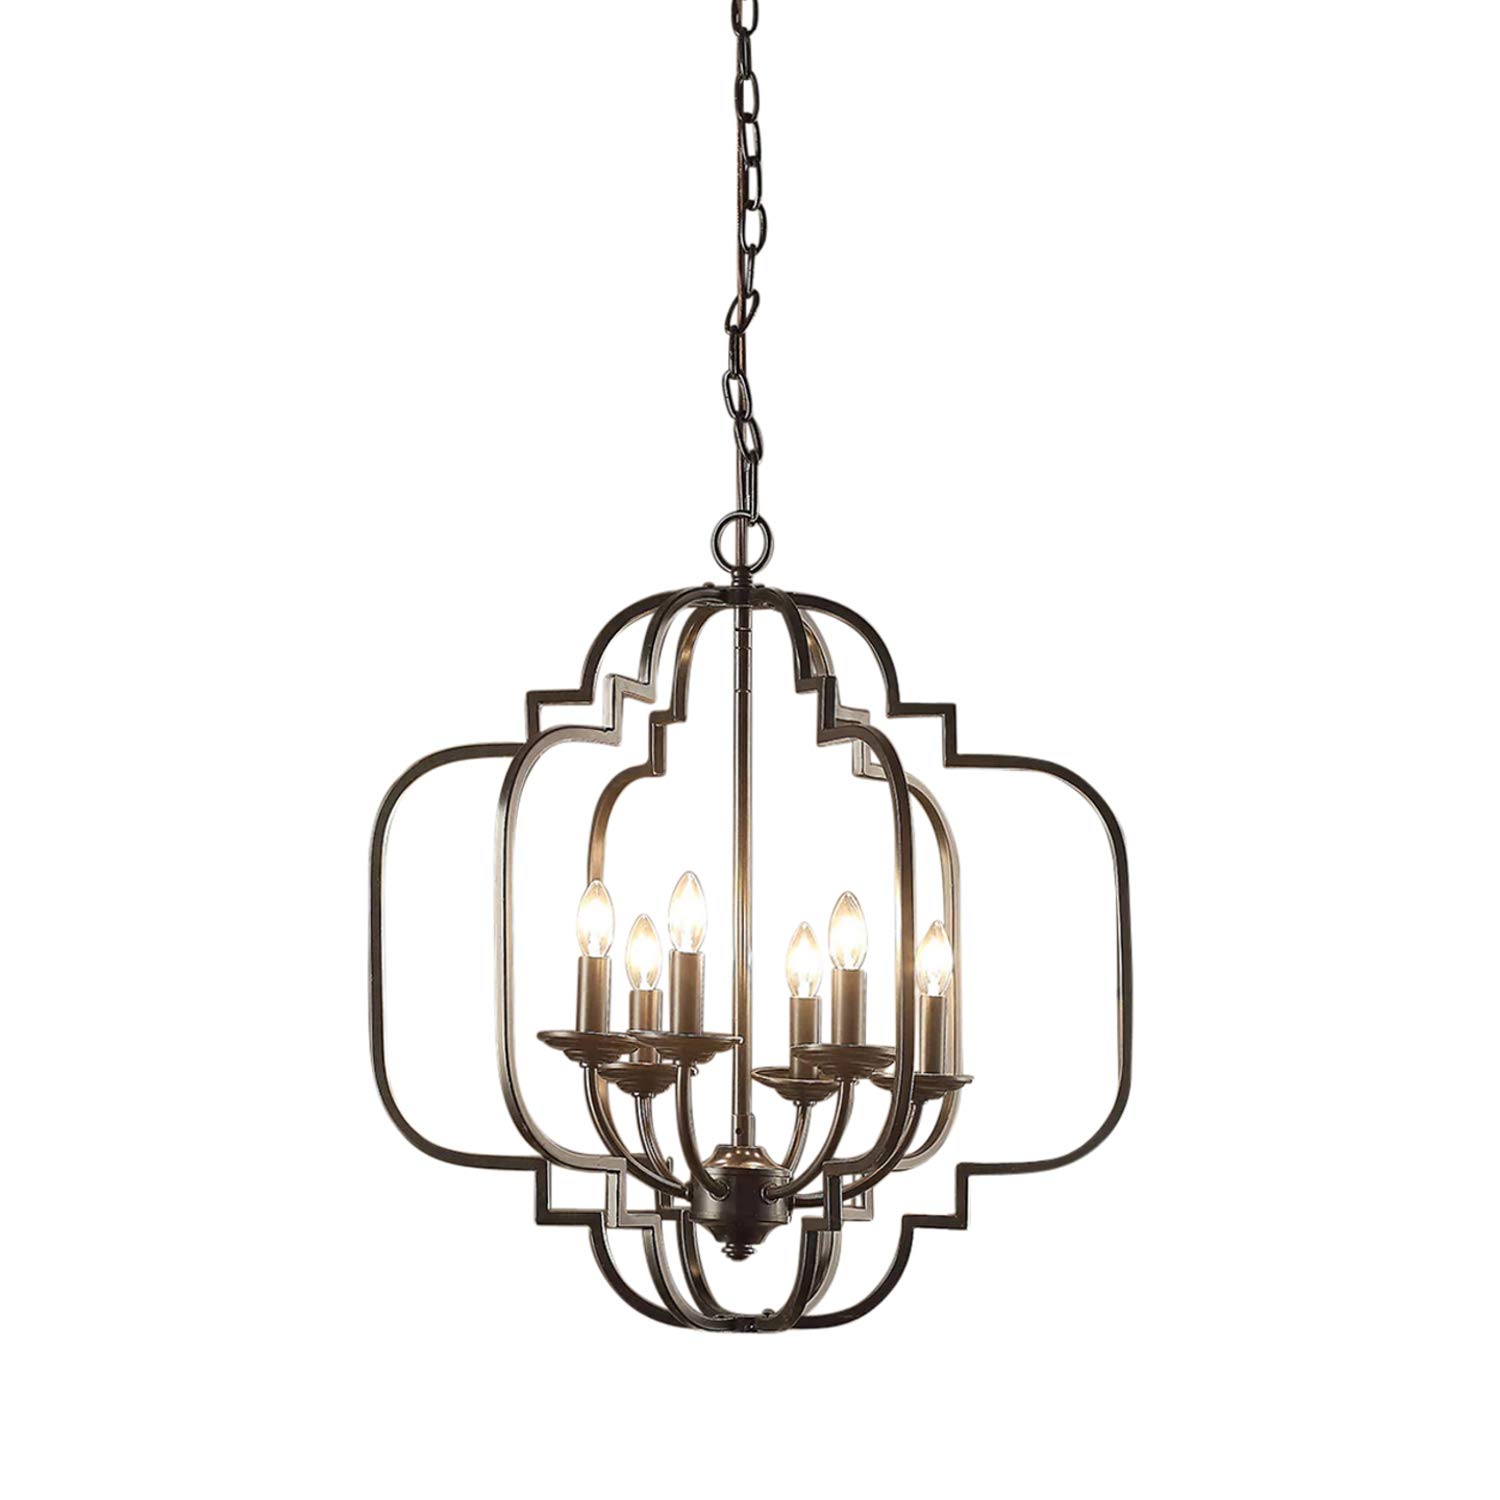 Modern Farmhouse Chandelier Suitable For Dining Rooms And Entryways With High Or Low Ceilings. Candle-Style Light Fixture Provides Multidirectional Lighting. Hanging Pendant Lamp Creates Timeless Feel